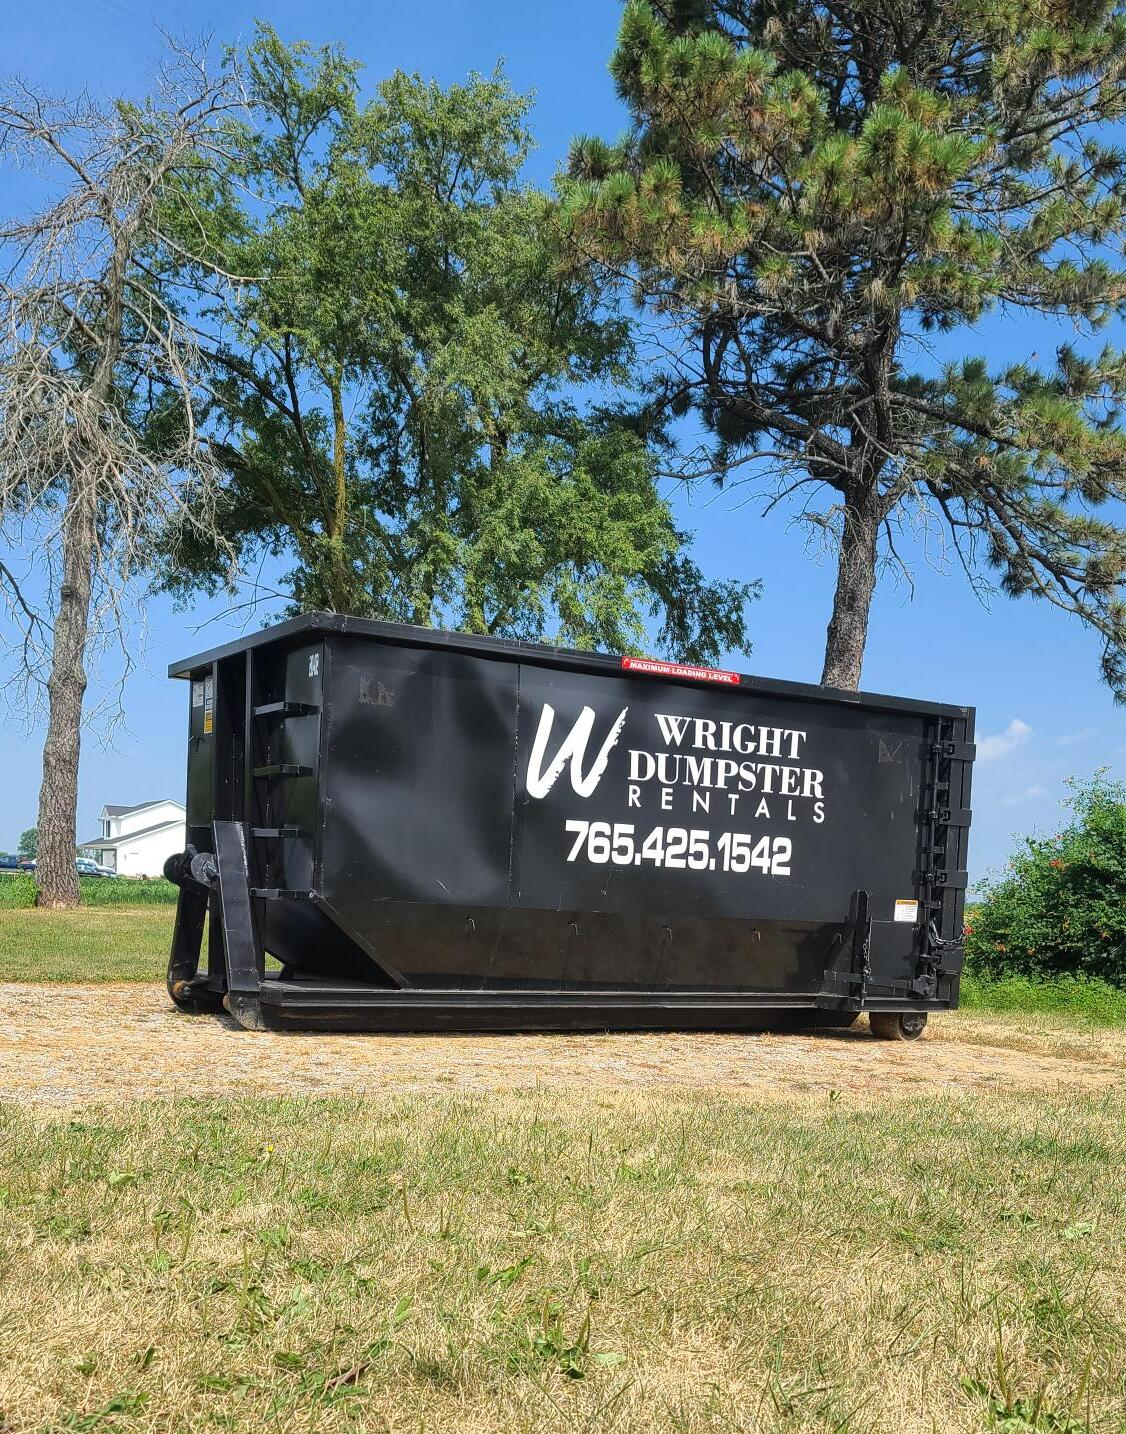 20 yard dumpster on hill, best dumpster rental company near me, muncie, madison county in, wright dumpster rentals